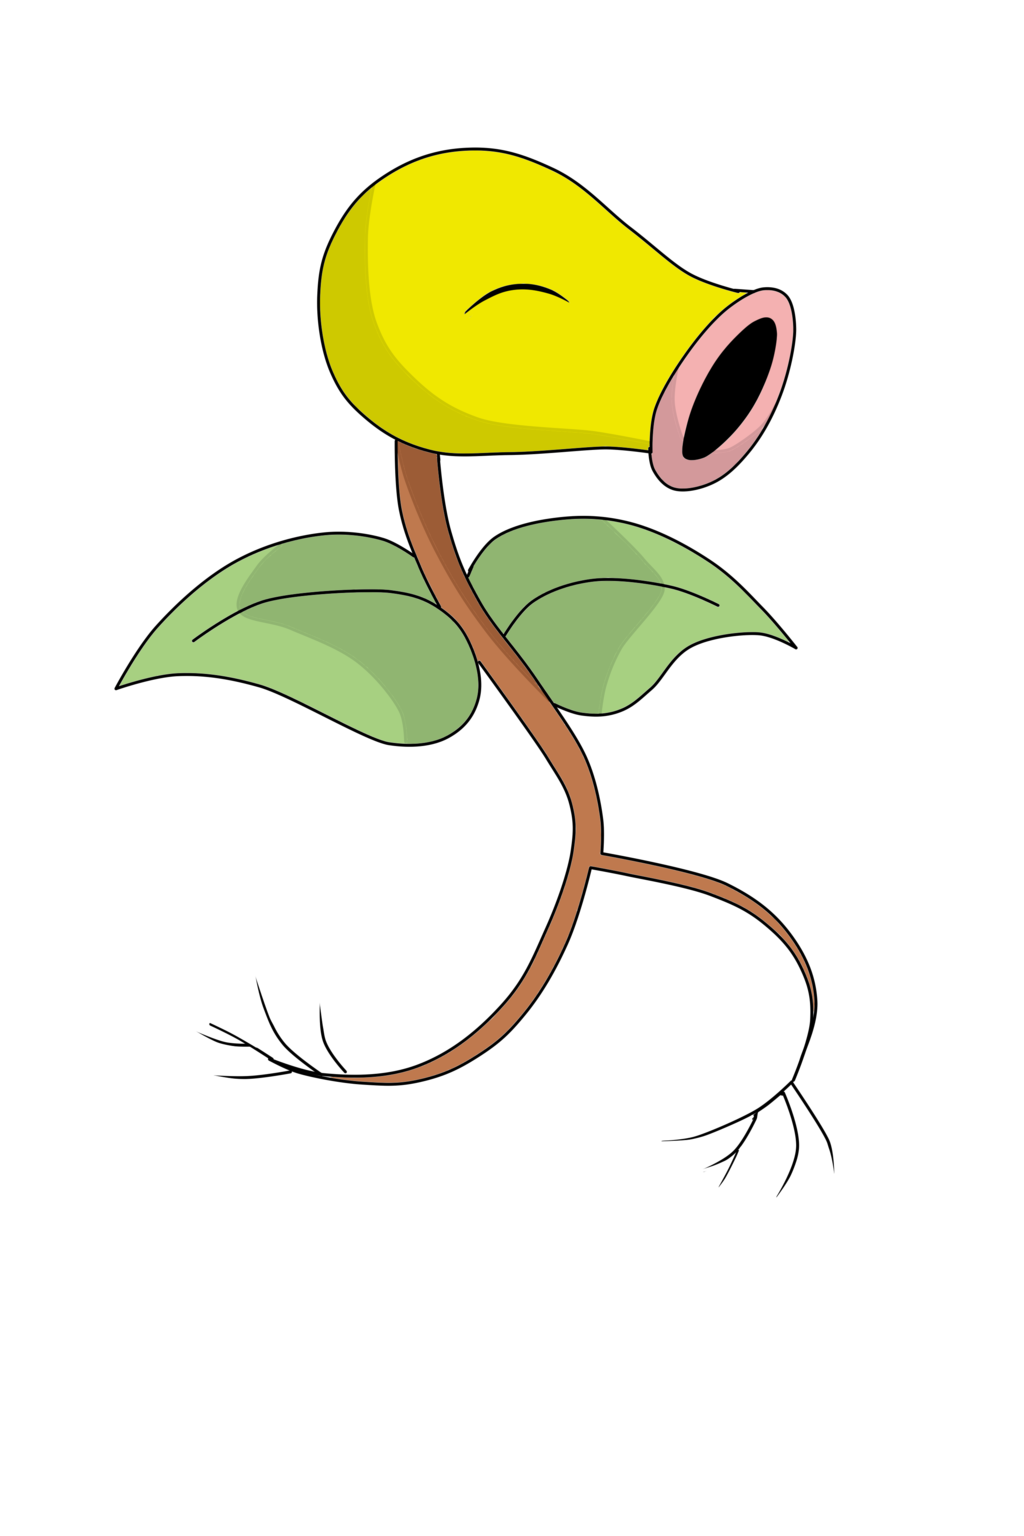 Bellsprout Full HD Pictures